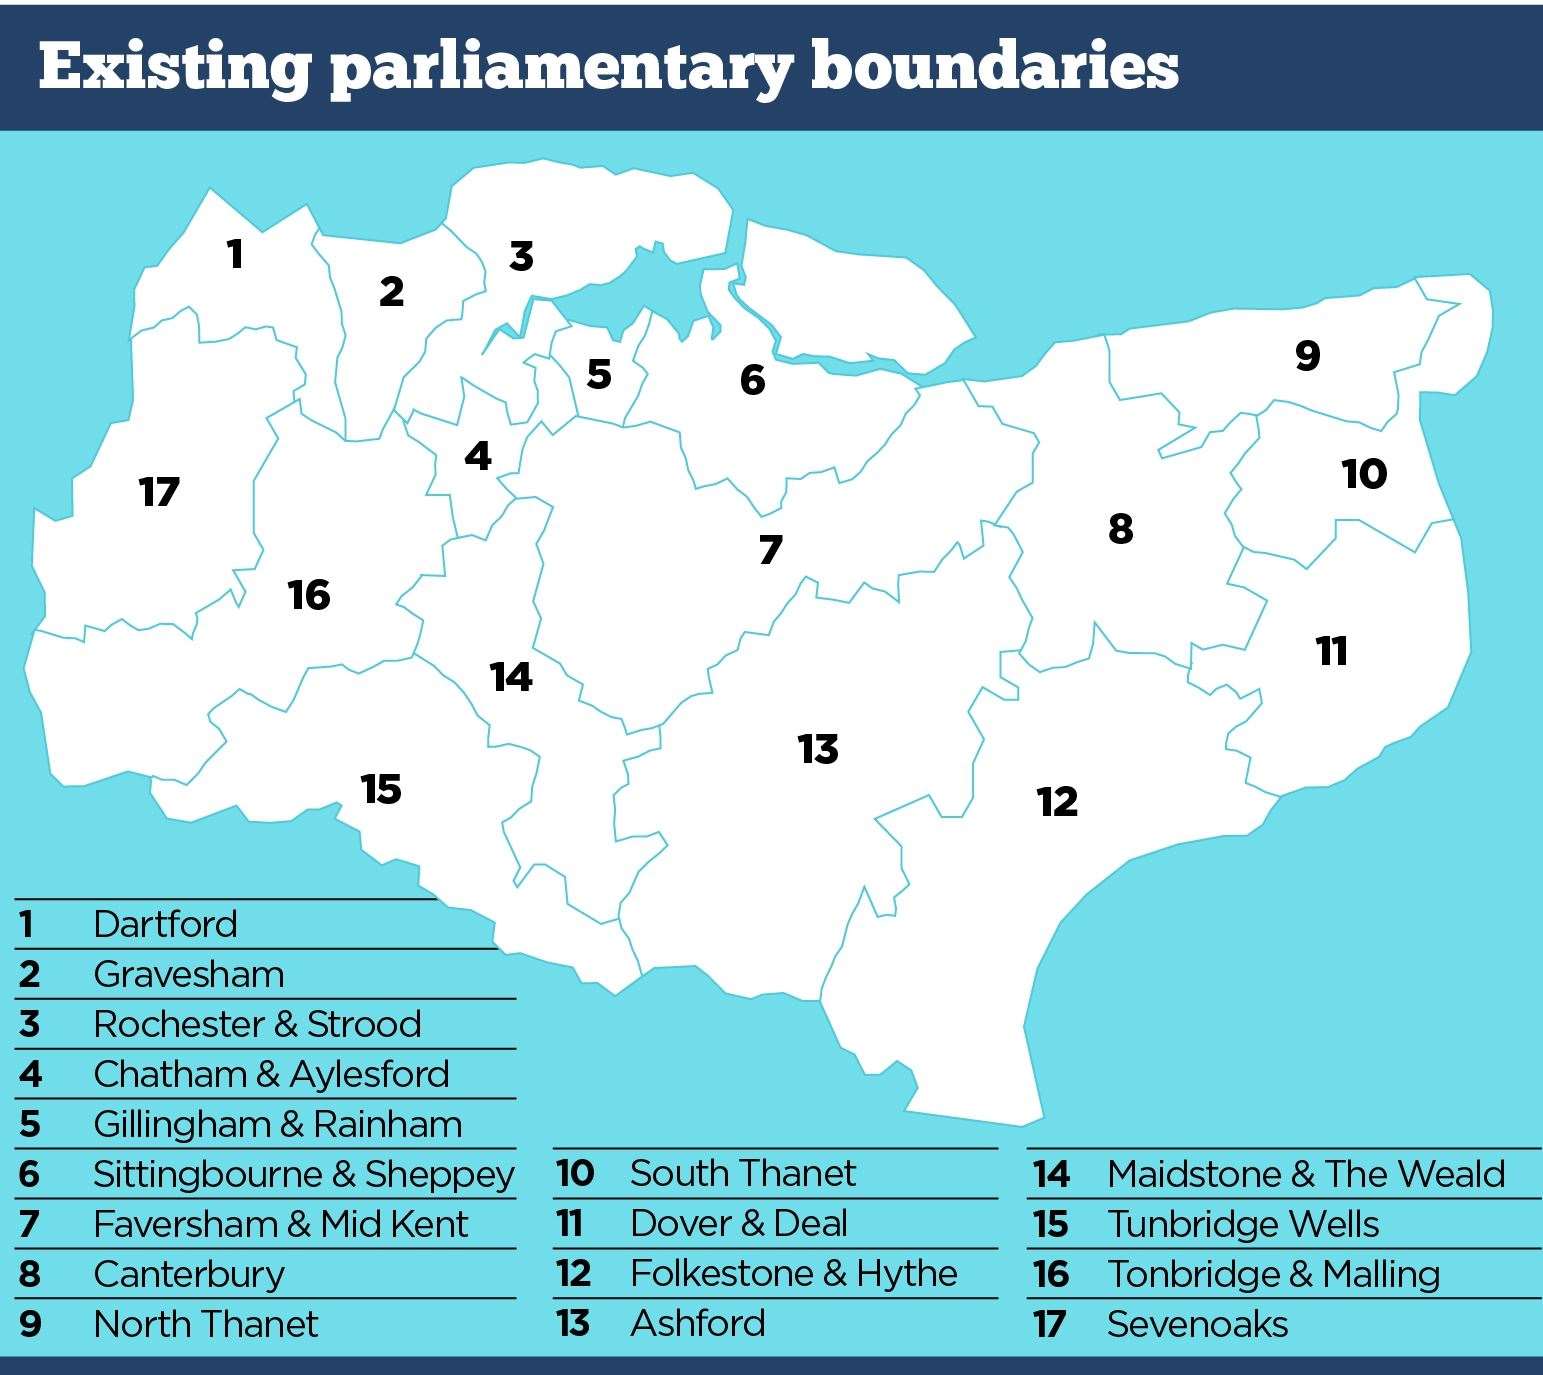 The existing parliament seats in Kent, which have been reviewed by the Boundary Commission